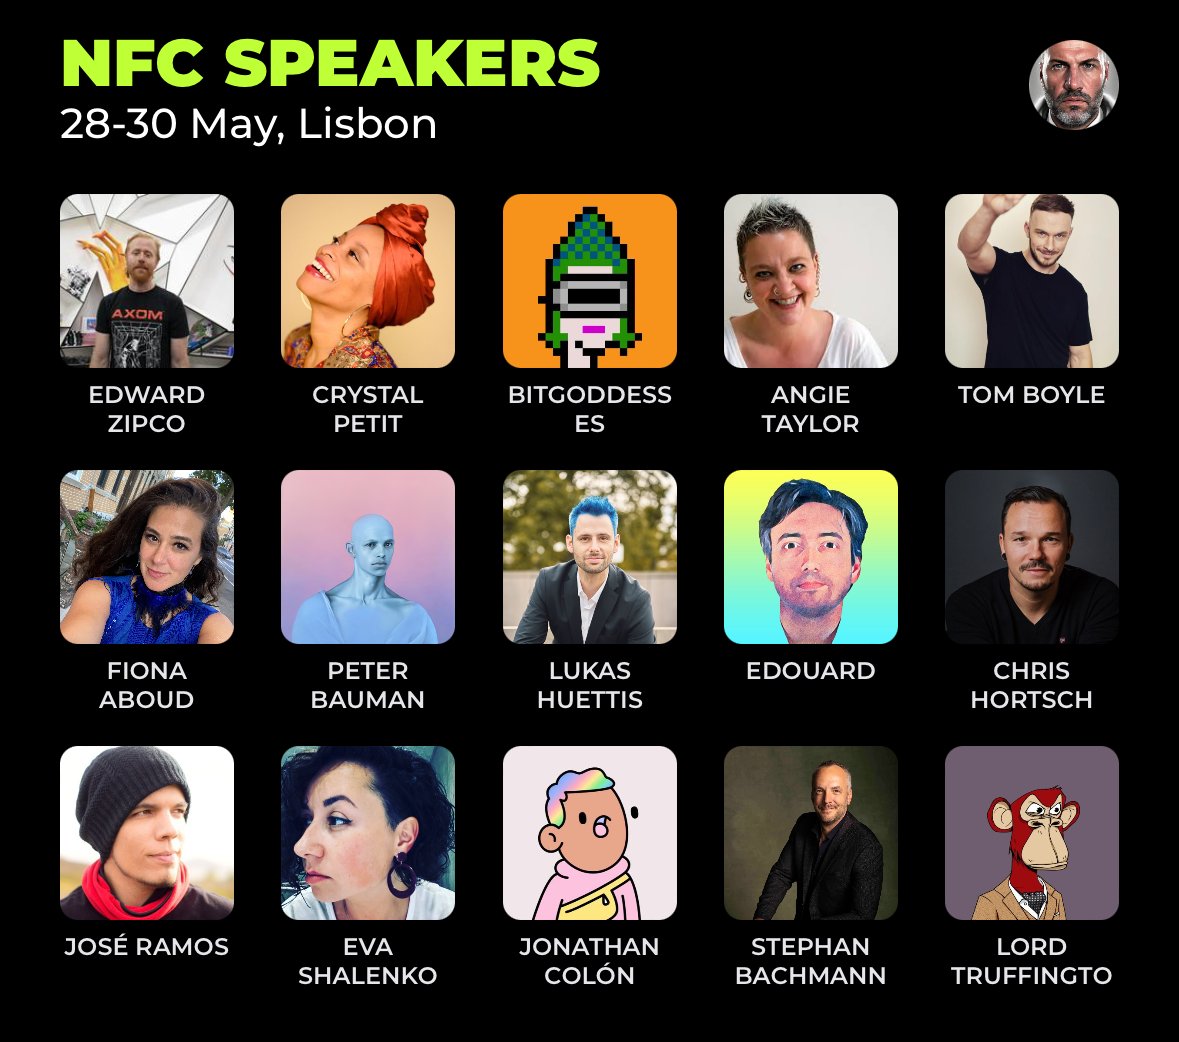 📢NFC 2024: Recommended Speakers (part 7) - Edward Zipco: Director & Co-Founder of Superchief Gallery NFT (@SuperchiefNFT) - Crystal Petit: Artistic Director (@CrystalPNight) - bitgoddesses: AI Artist & Researcher, AI Geospatial (@BITGODDESSES) - Angie Taylor: Artist making